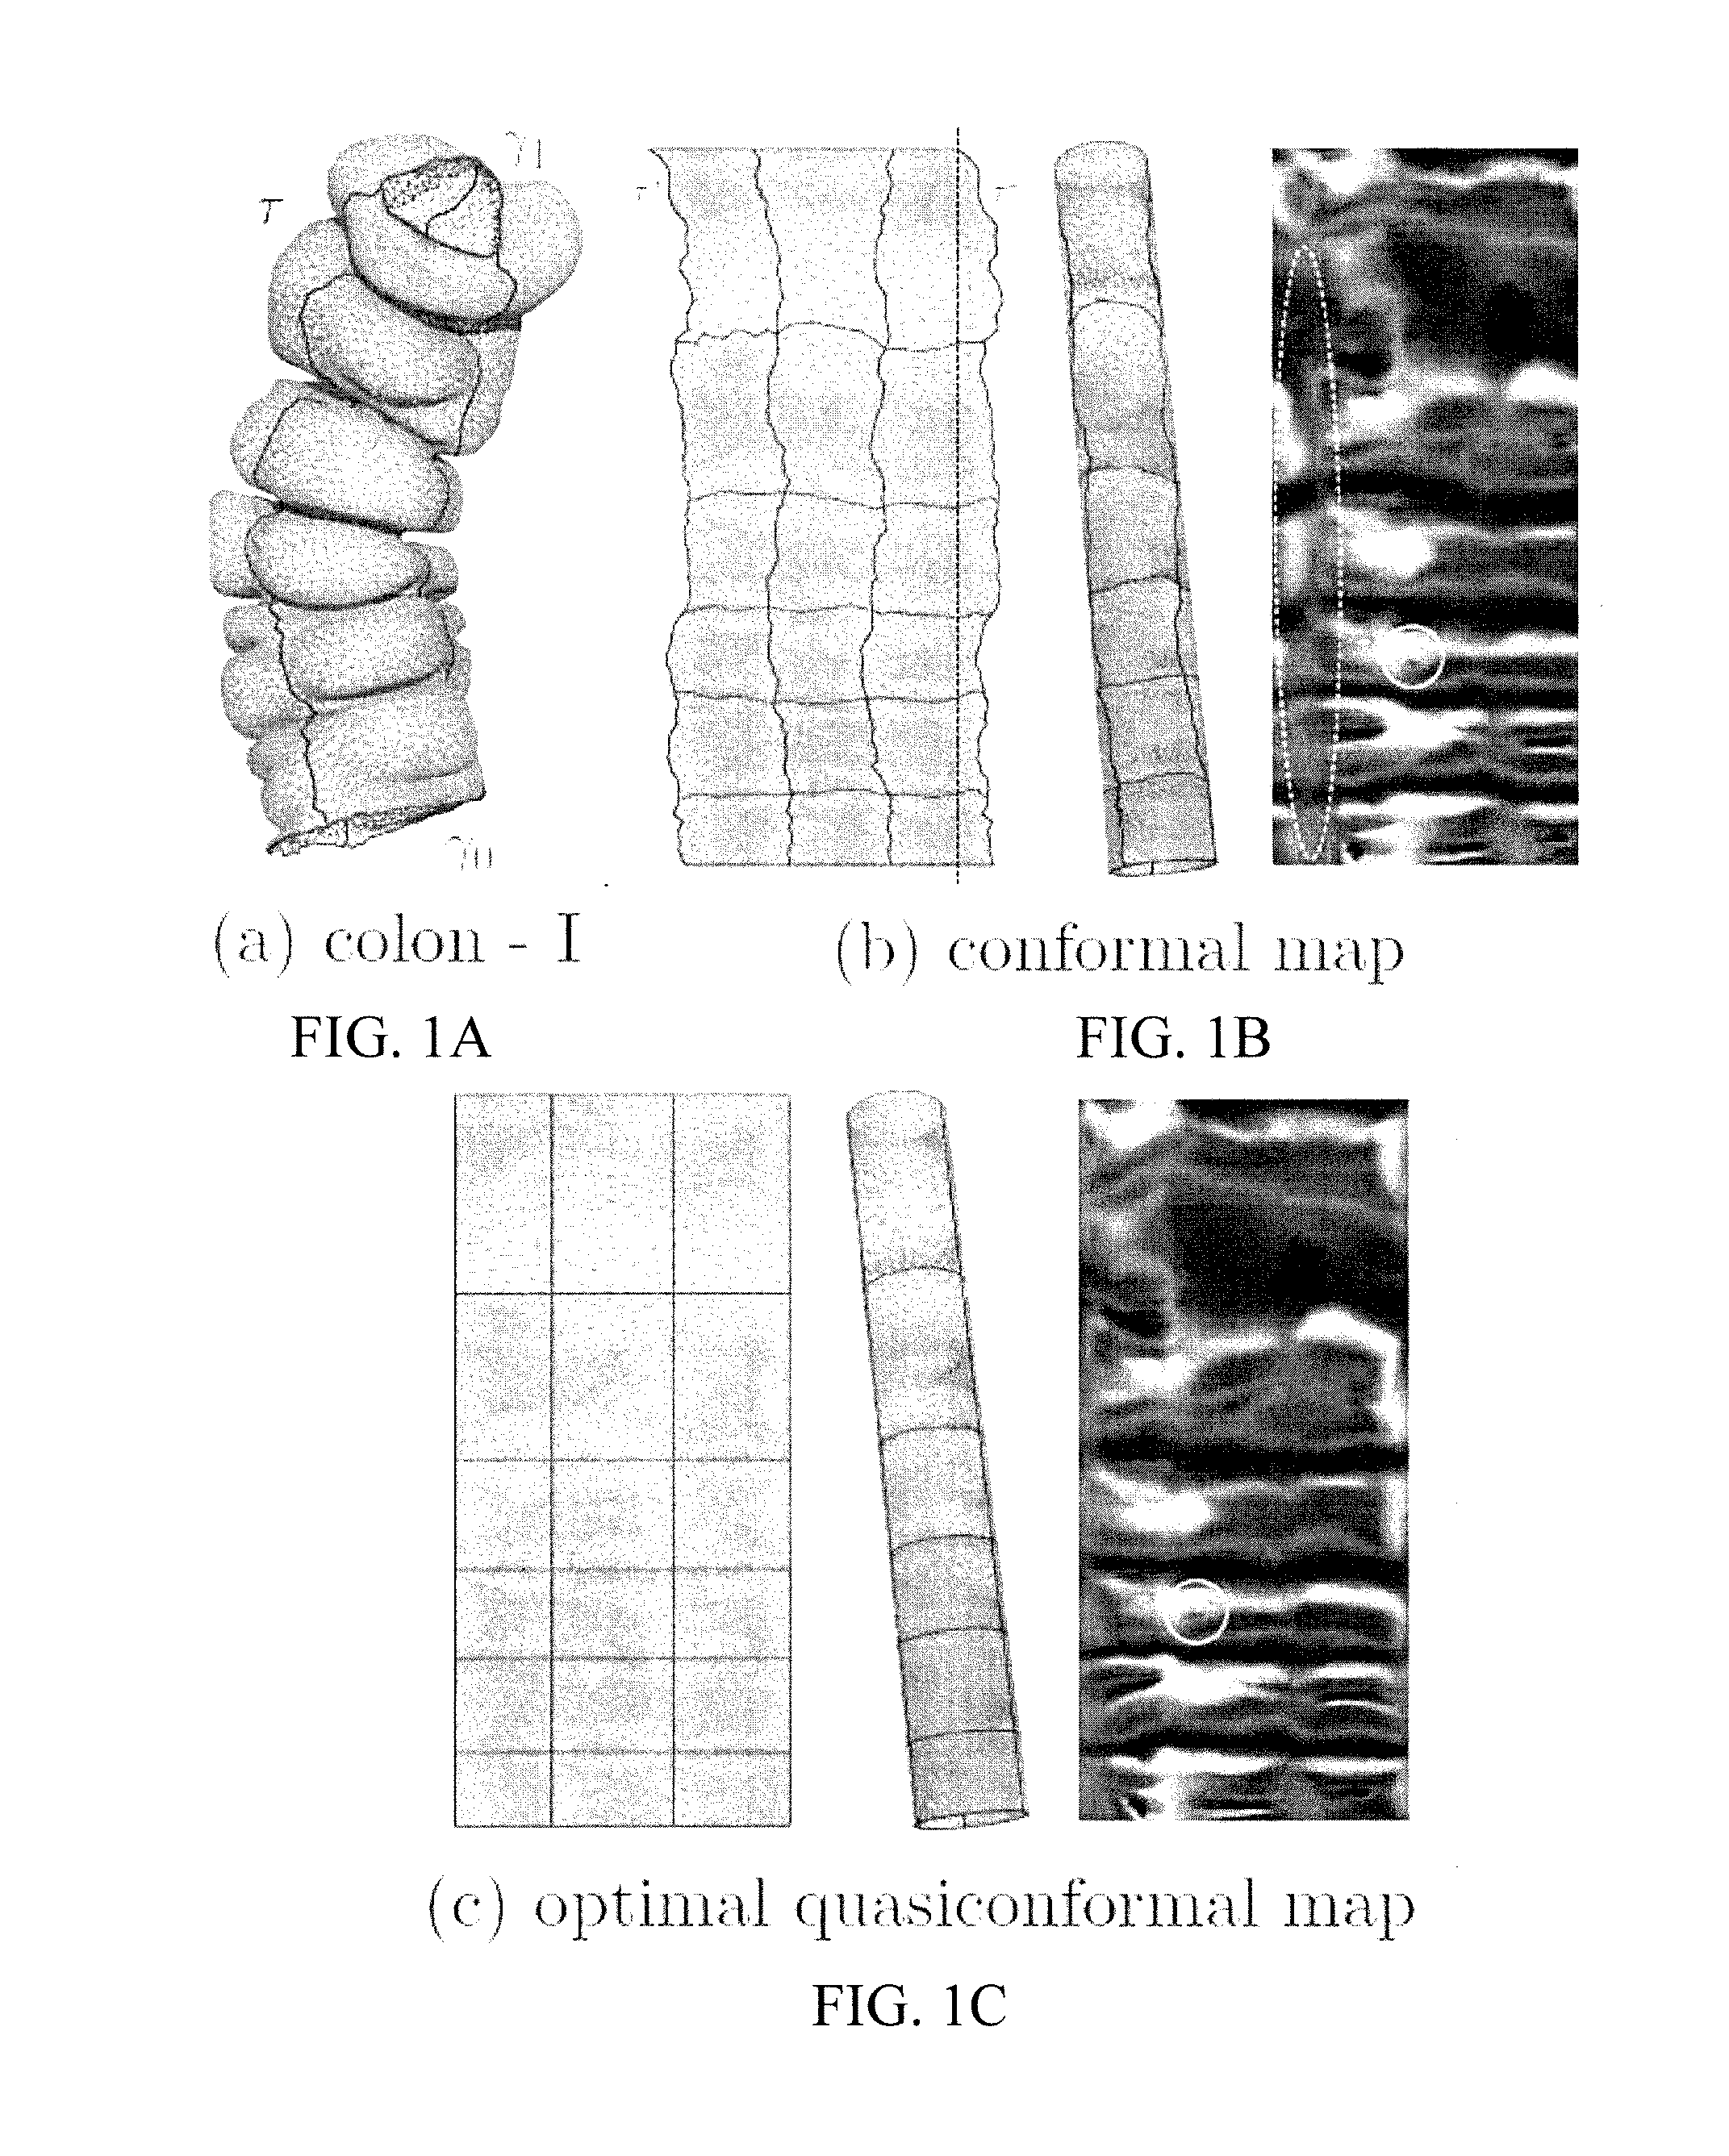 Systems and methods for shape analysis using landmark-driven quasiconformal mapping